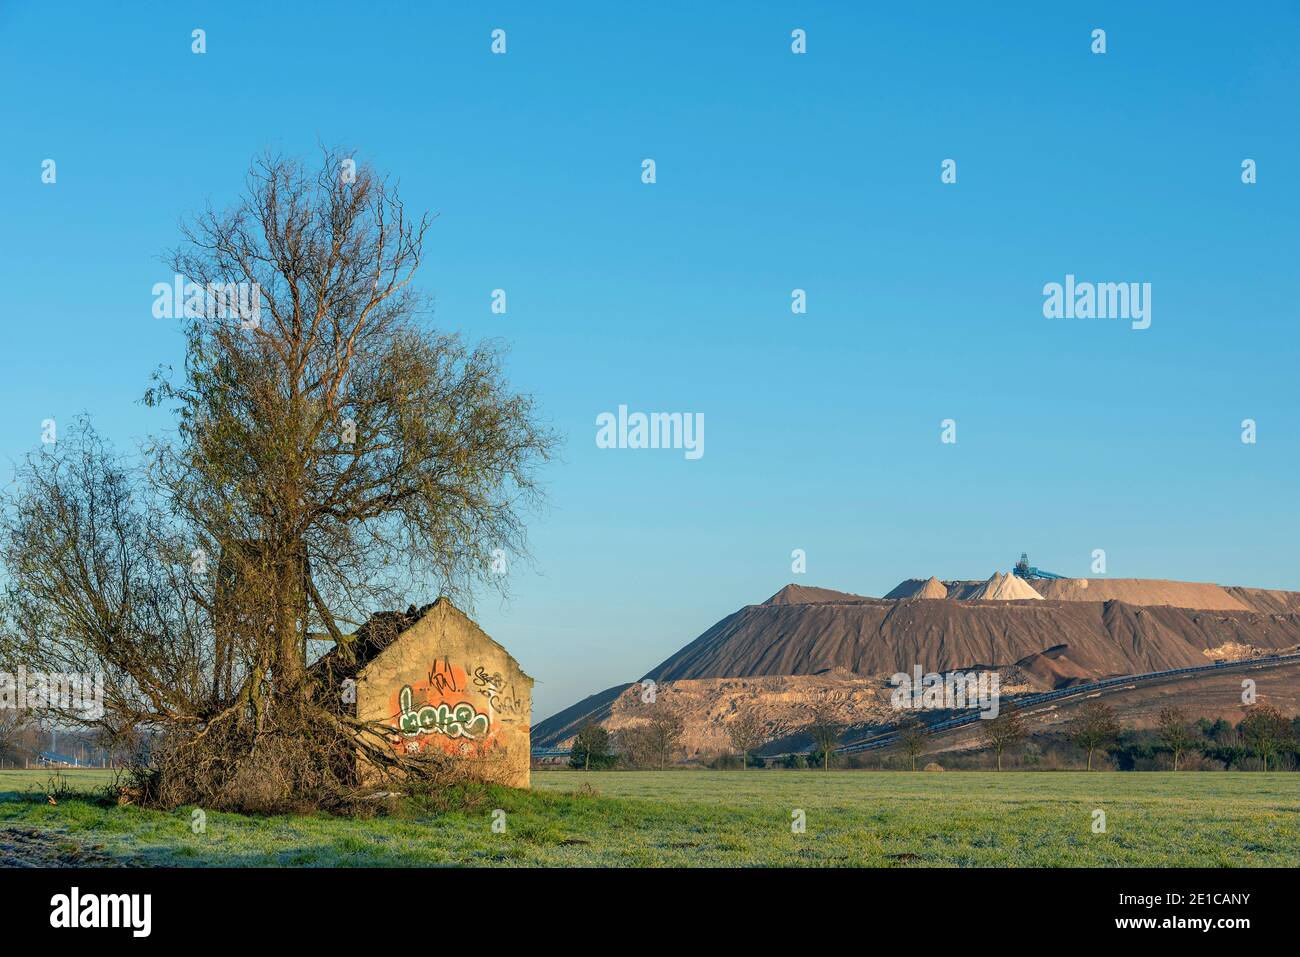 Wolmirstedt, Germany. 19th Dec, 2020. A ruined house stands in a field next to a high stand. Behind it, the tailings pile of the Zielitz potash plant can be seen. The K S company will expand the tailings pile by 200 hectares over the next few years. Permission for this has now been granted by the State Office for Geology and Mining (LAGB). This will secure the production of fertilizers and salt in Zielitz until 2054. The tailings pile is also called Kilimanjaro. Credit: Stephan Schulz/dpa-Zentralbild/ZB/dpa/Alamy Live News Stock Photo